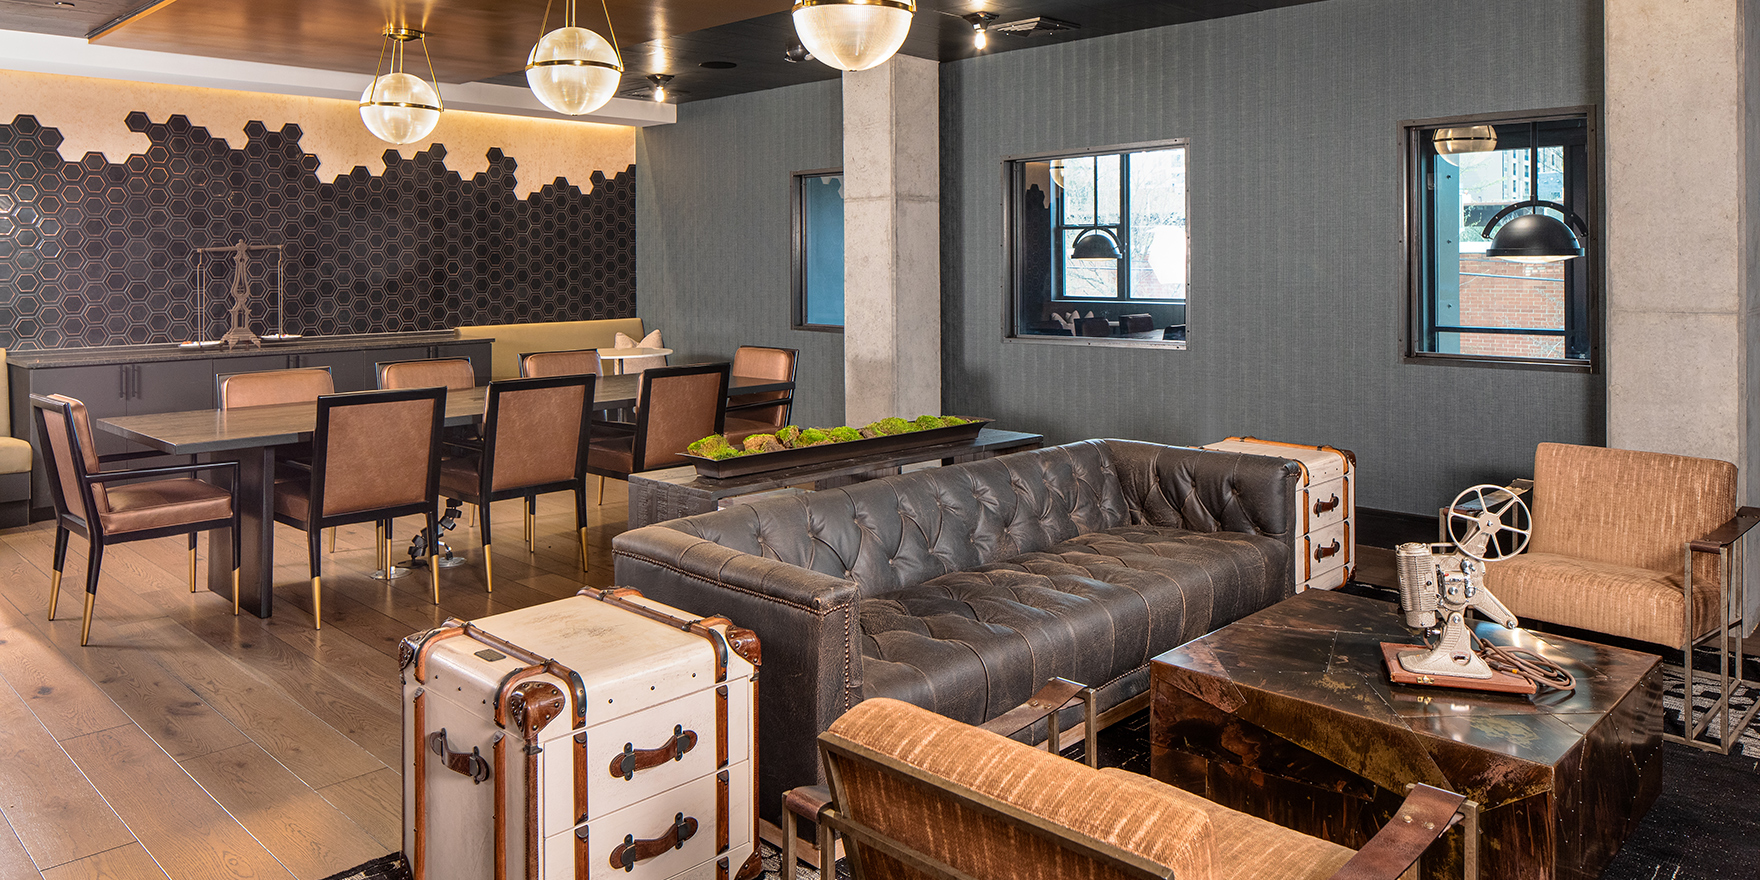 The Line boxcar lounge amenity with co-working and social space